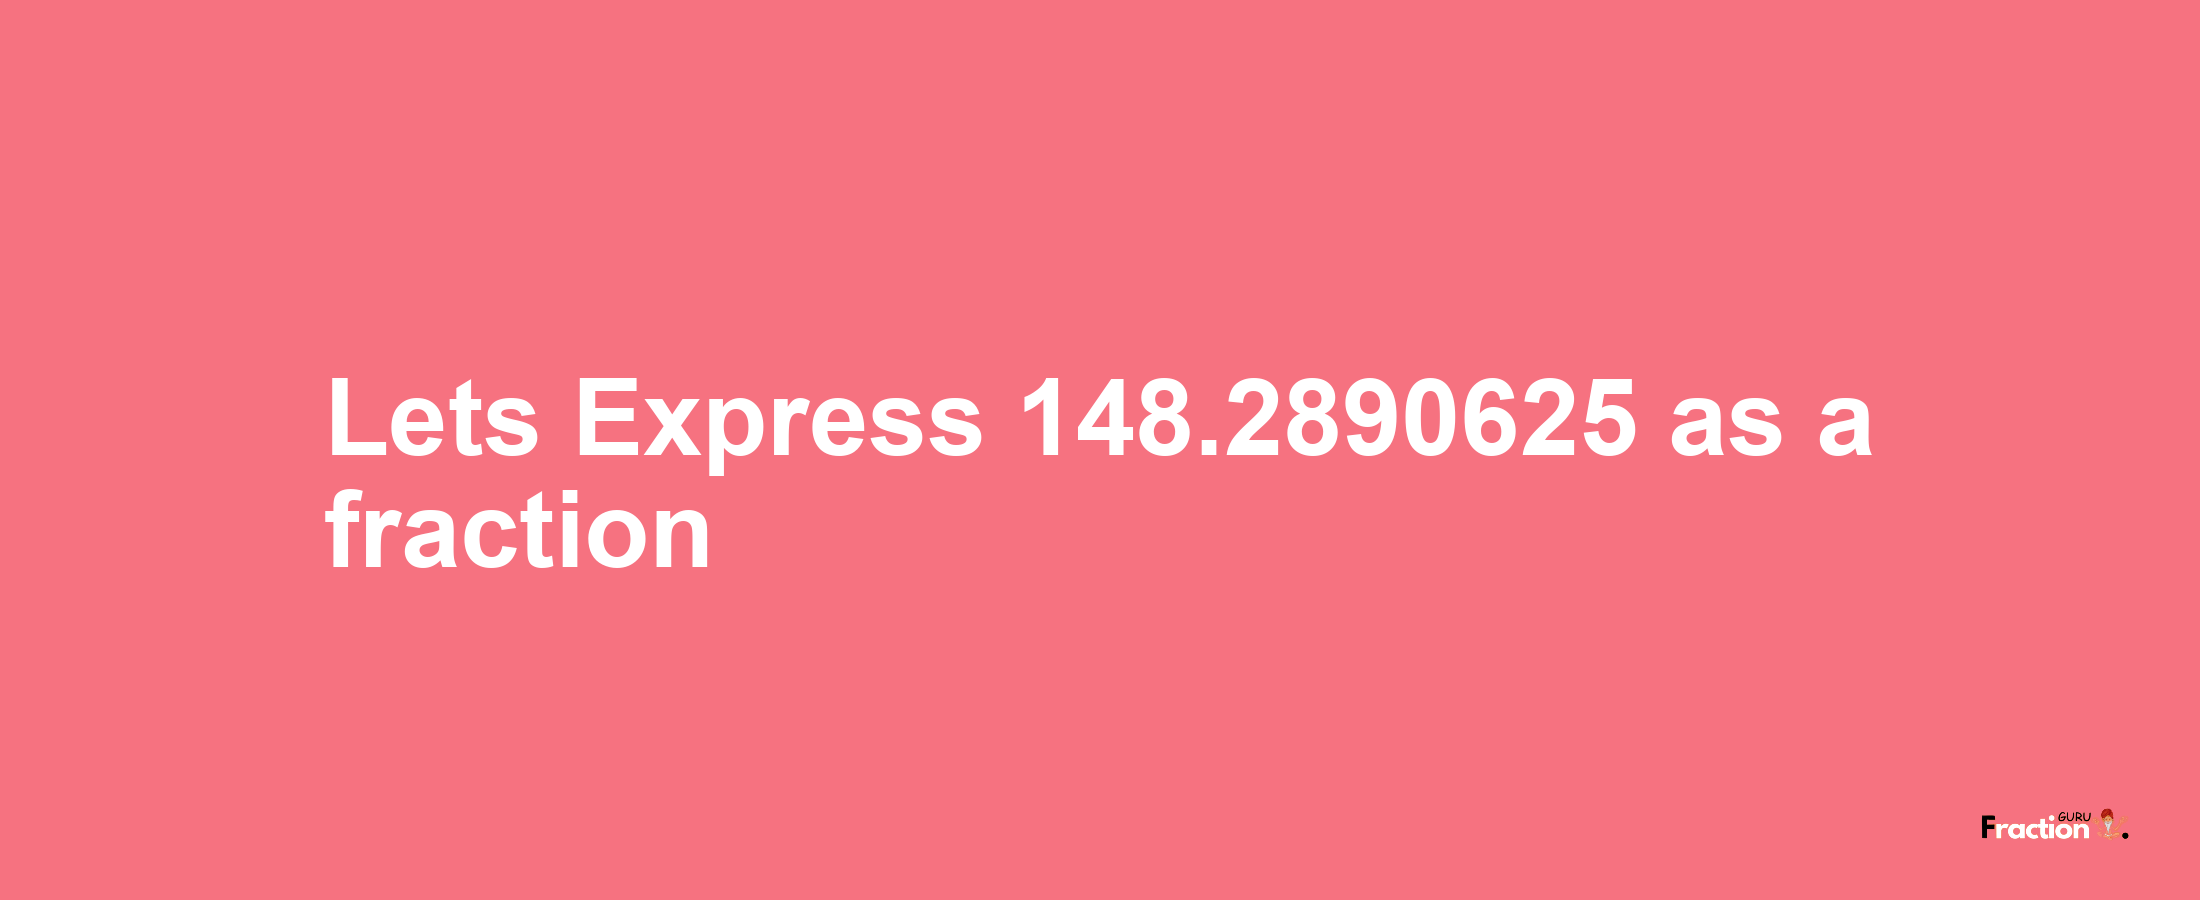 Lets Express 148.2890625 as afraction